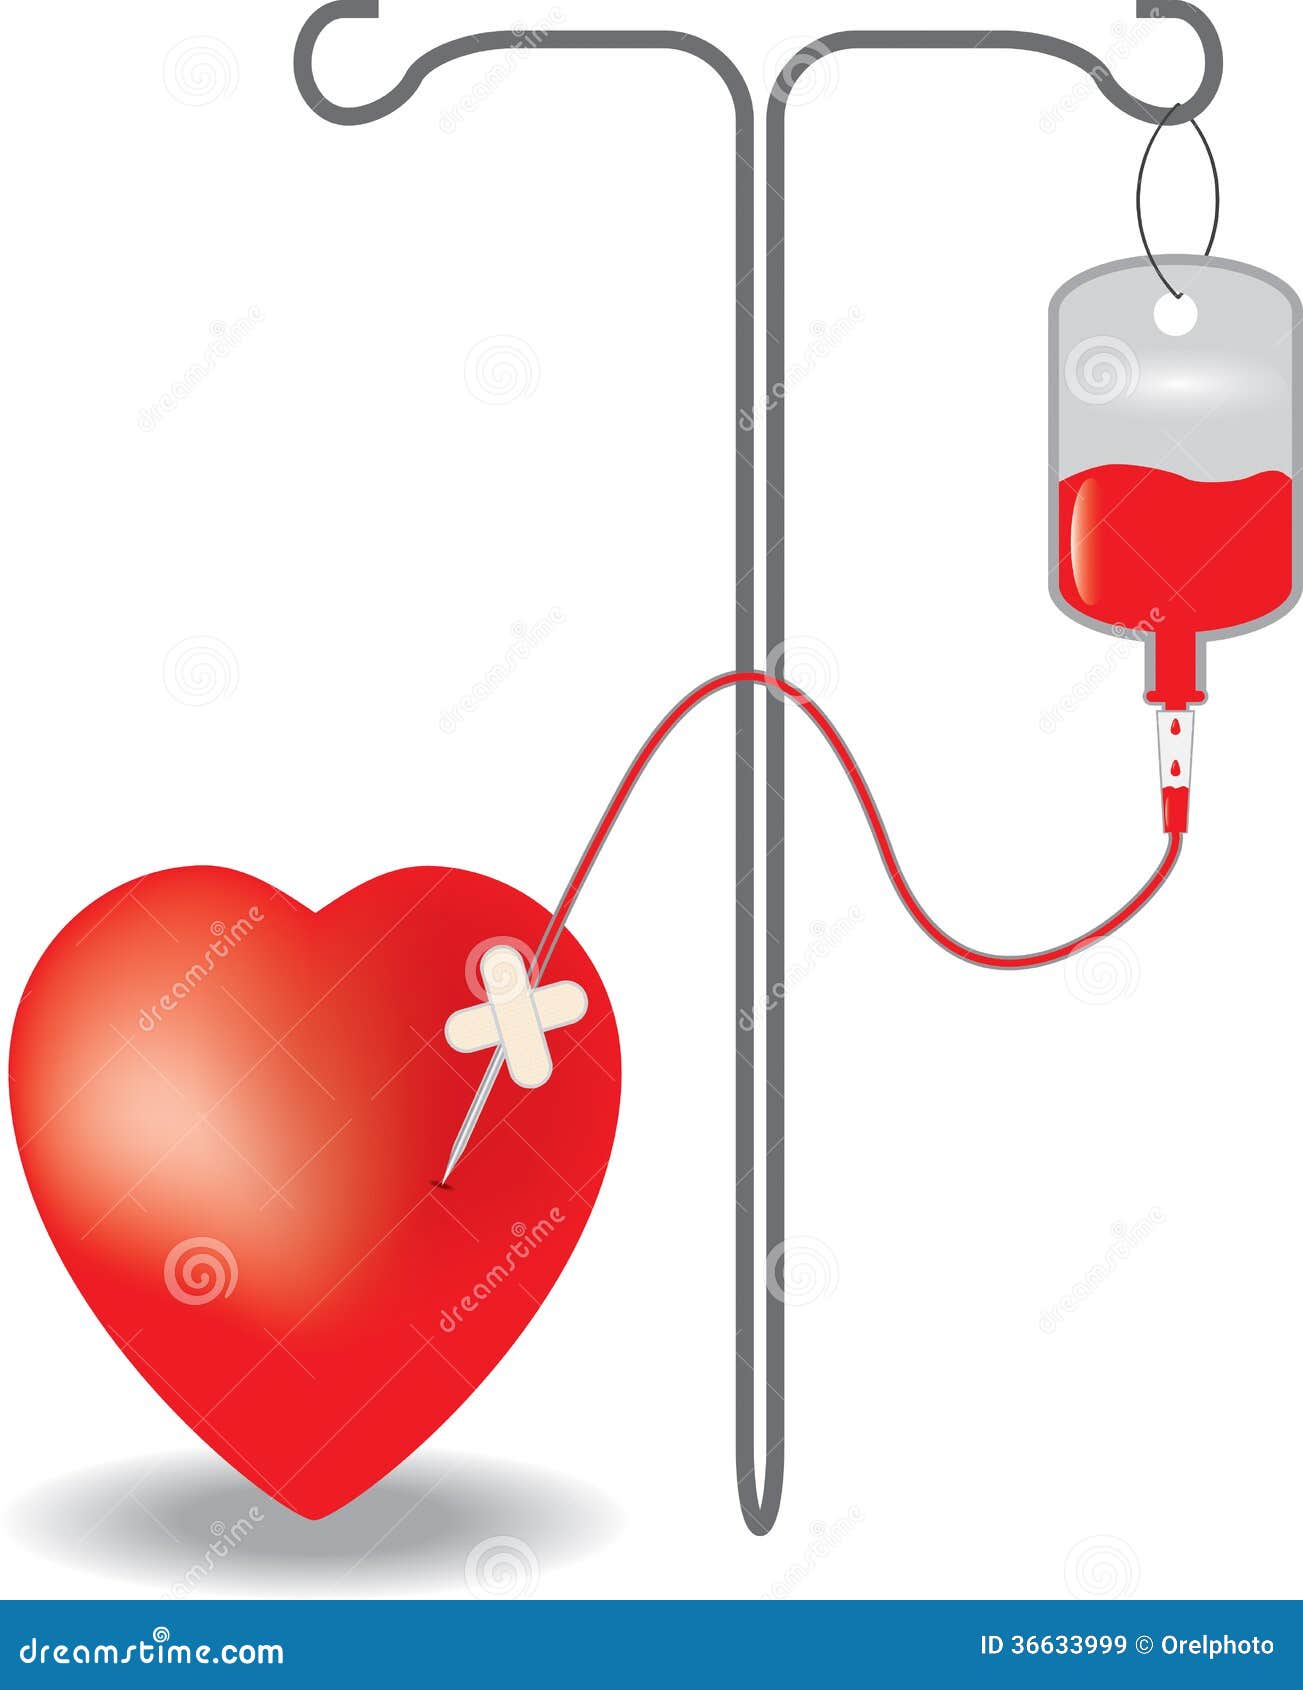 free blood donation clipart - photo #24